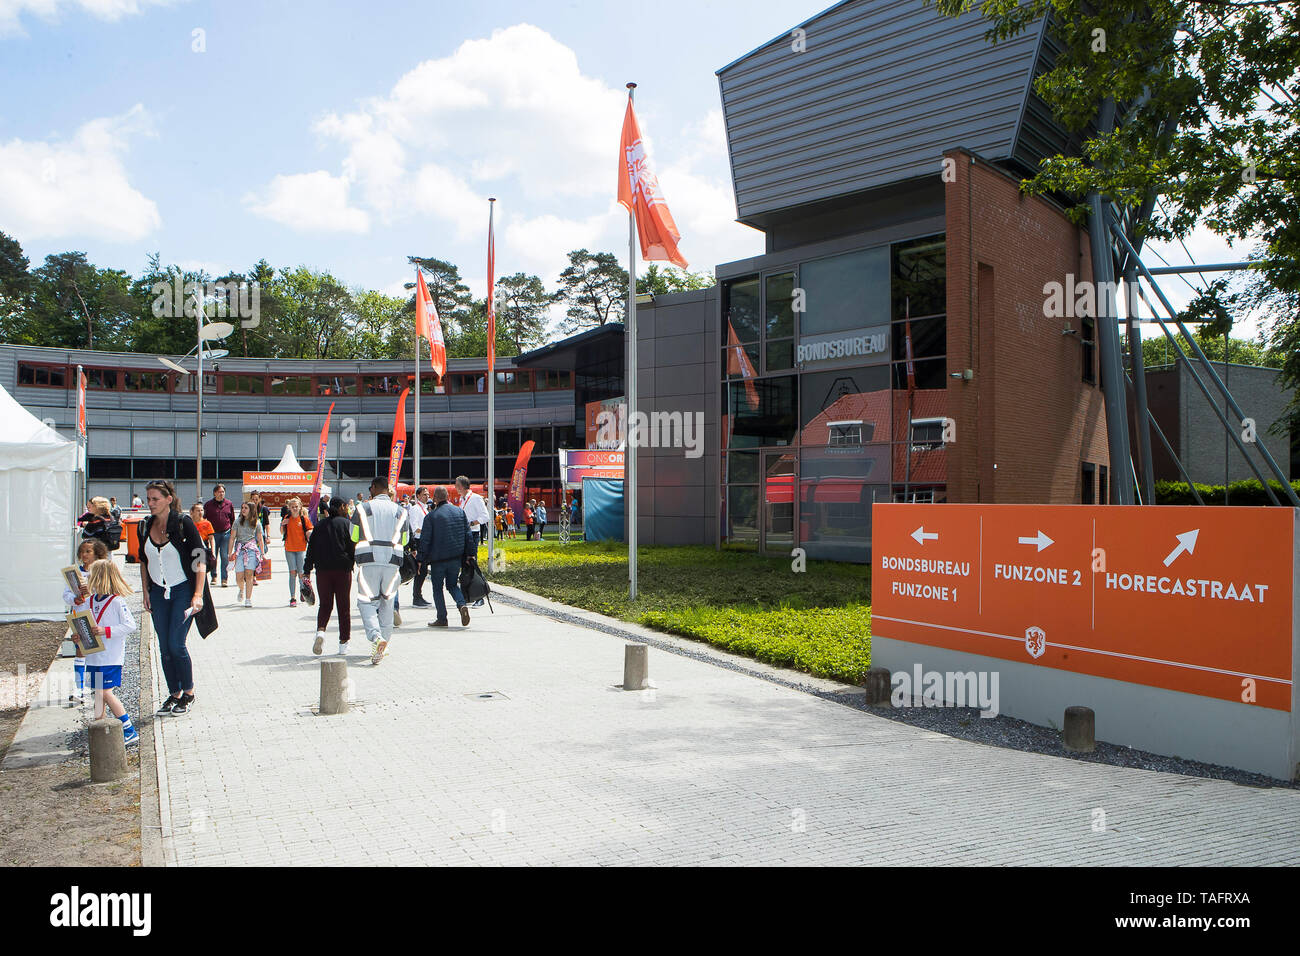 KNVB - Campus - DAY